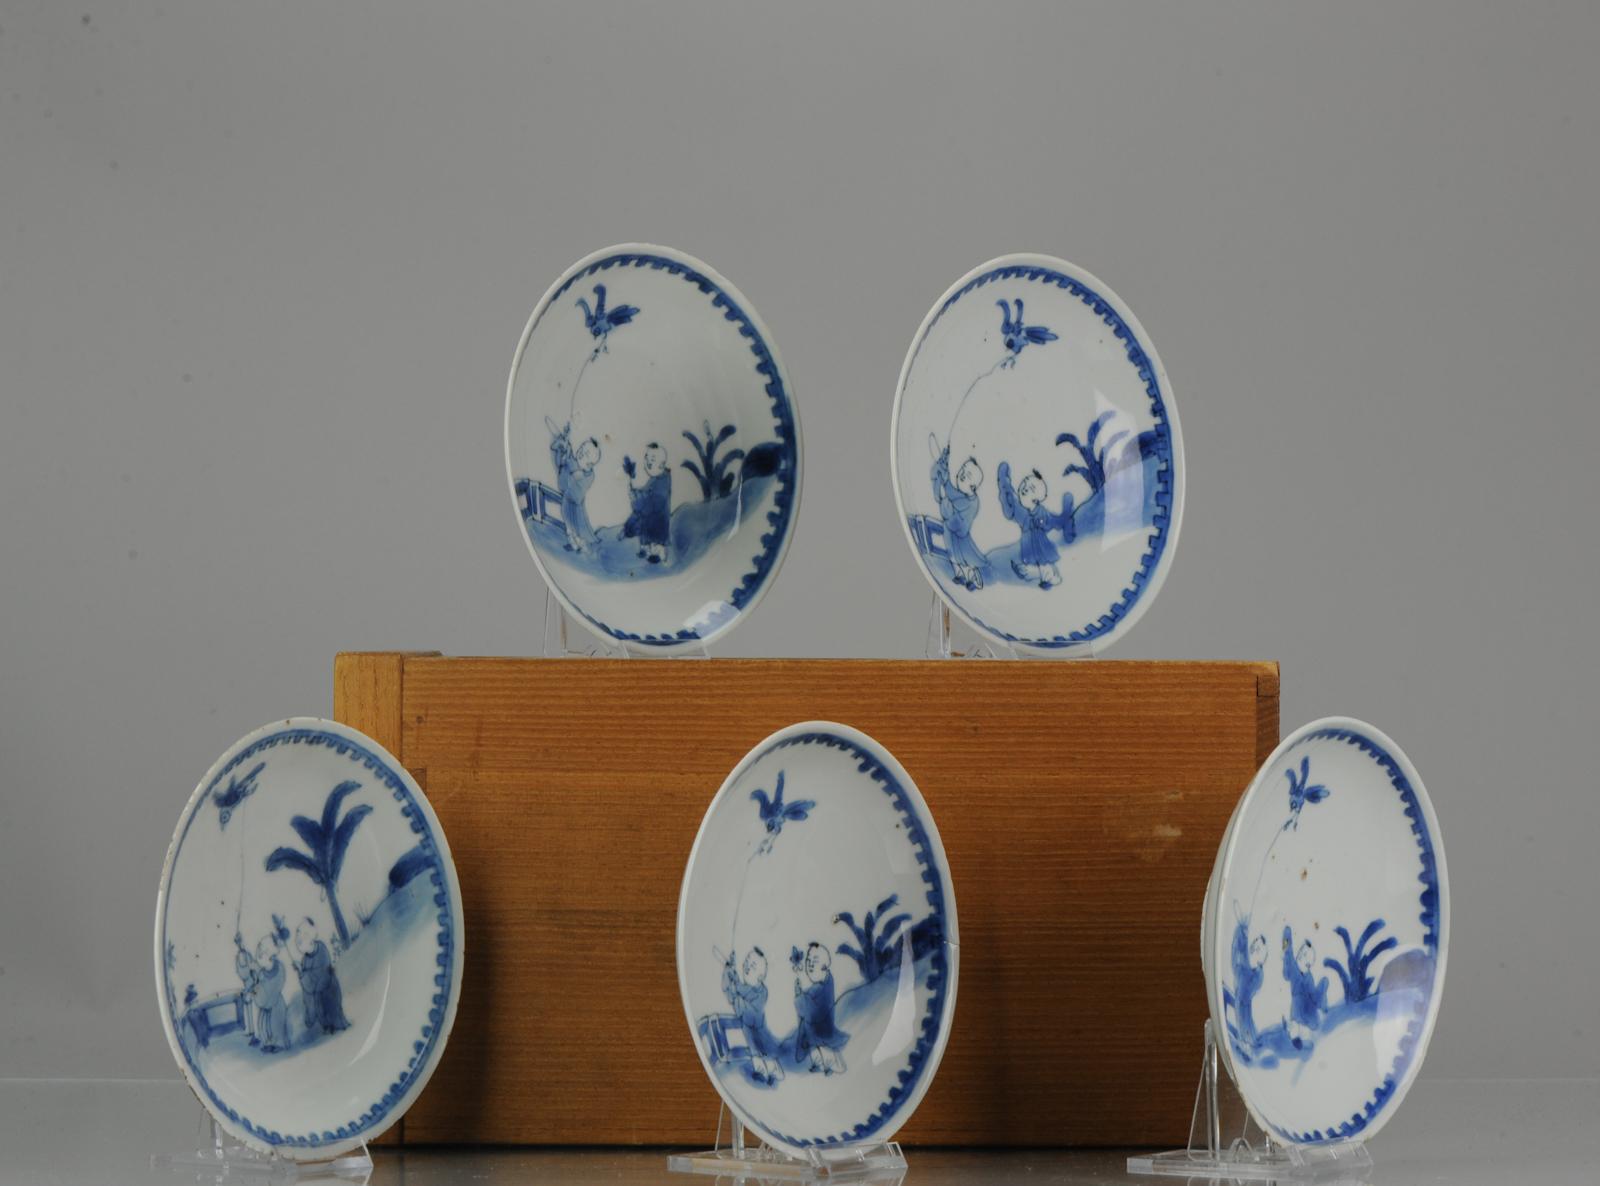 Antique Kaiseki Set of 5 Chinese Porcelain 17th C Kosometsuke Boy and Bird di For Sale 6